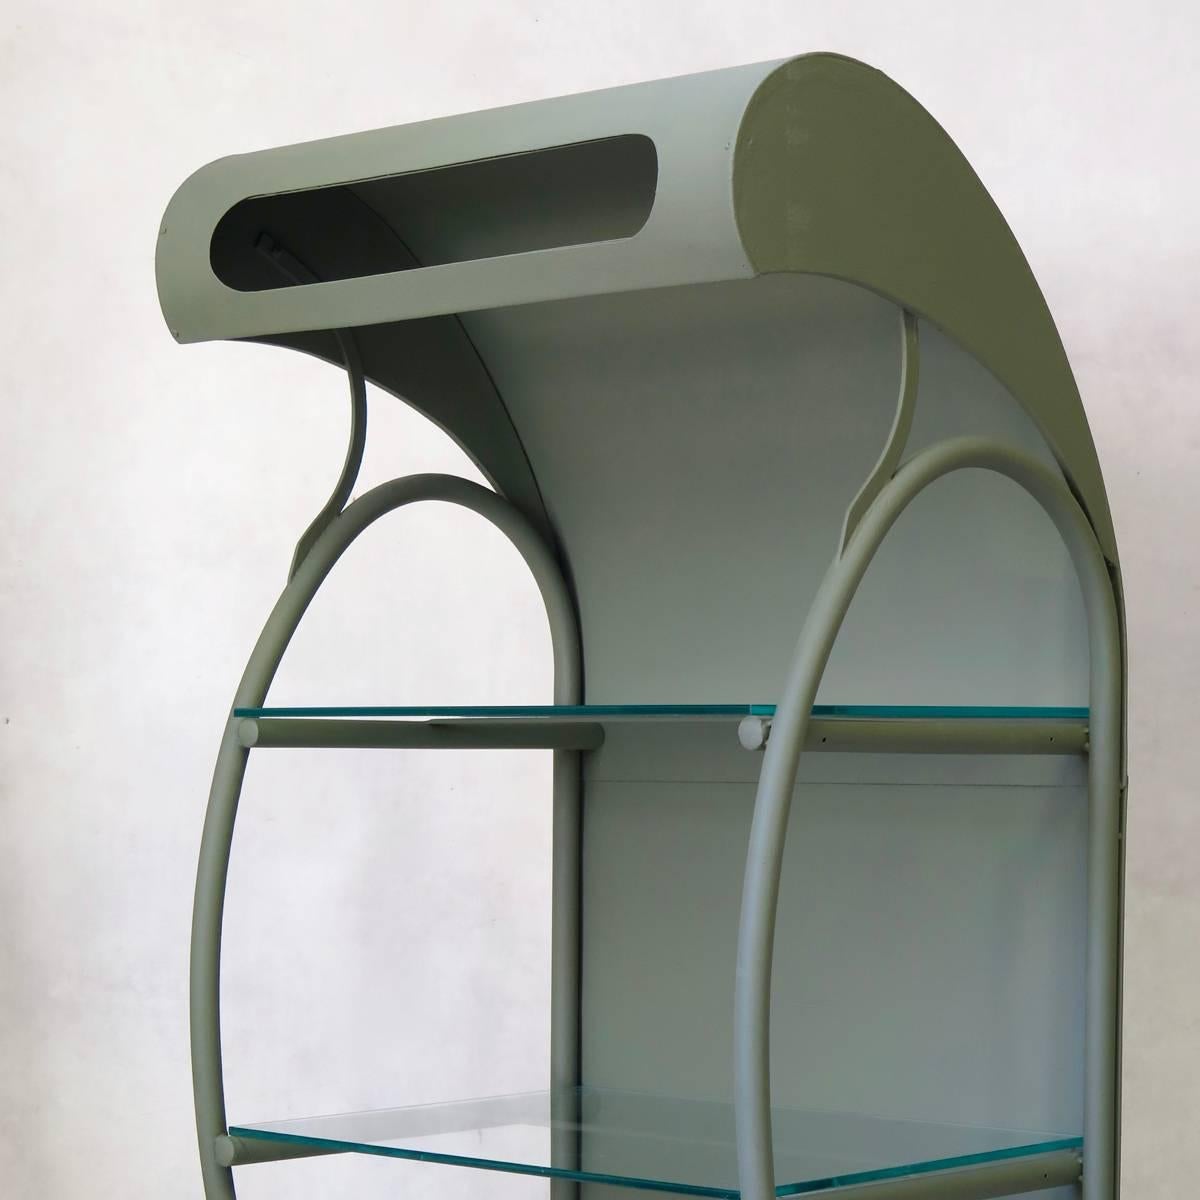 One-of-a-kind pair of custom-made shelvings units, with a hooded metal top, and glass shelves, painted a green/grey color.